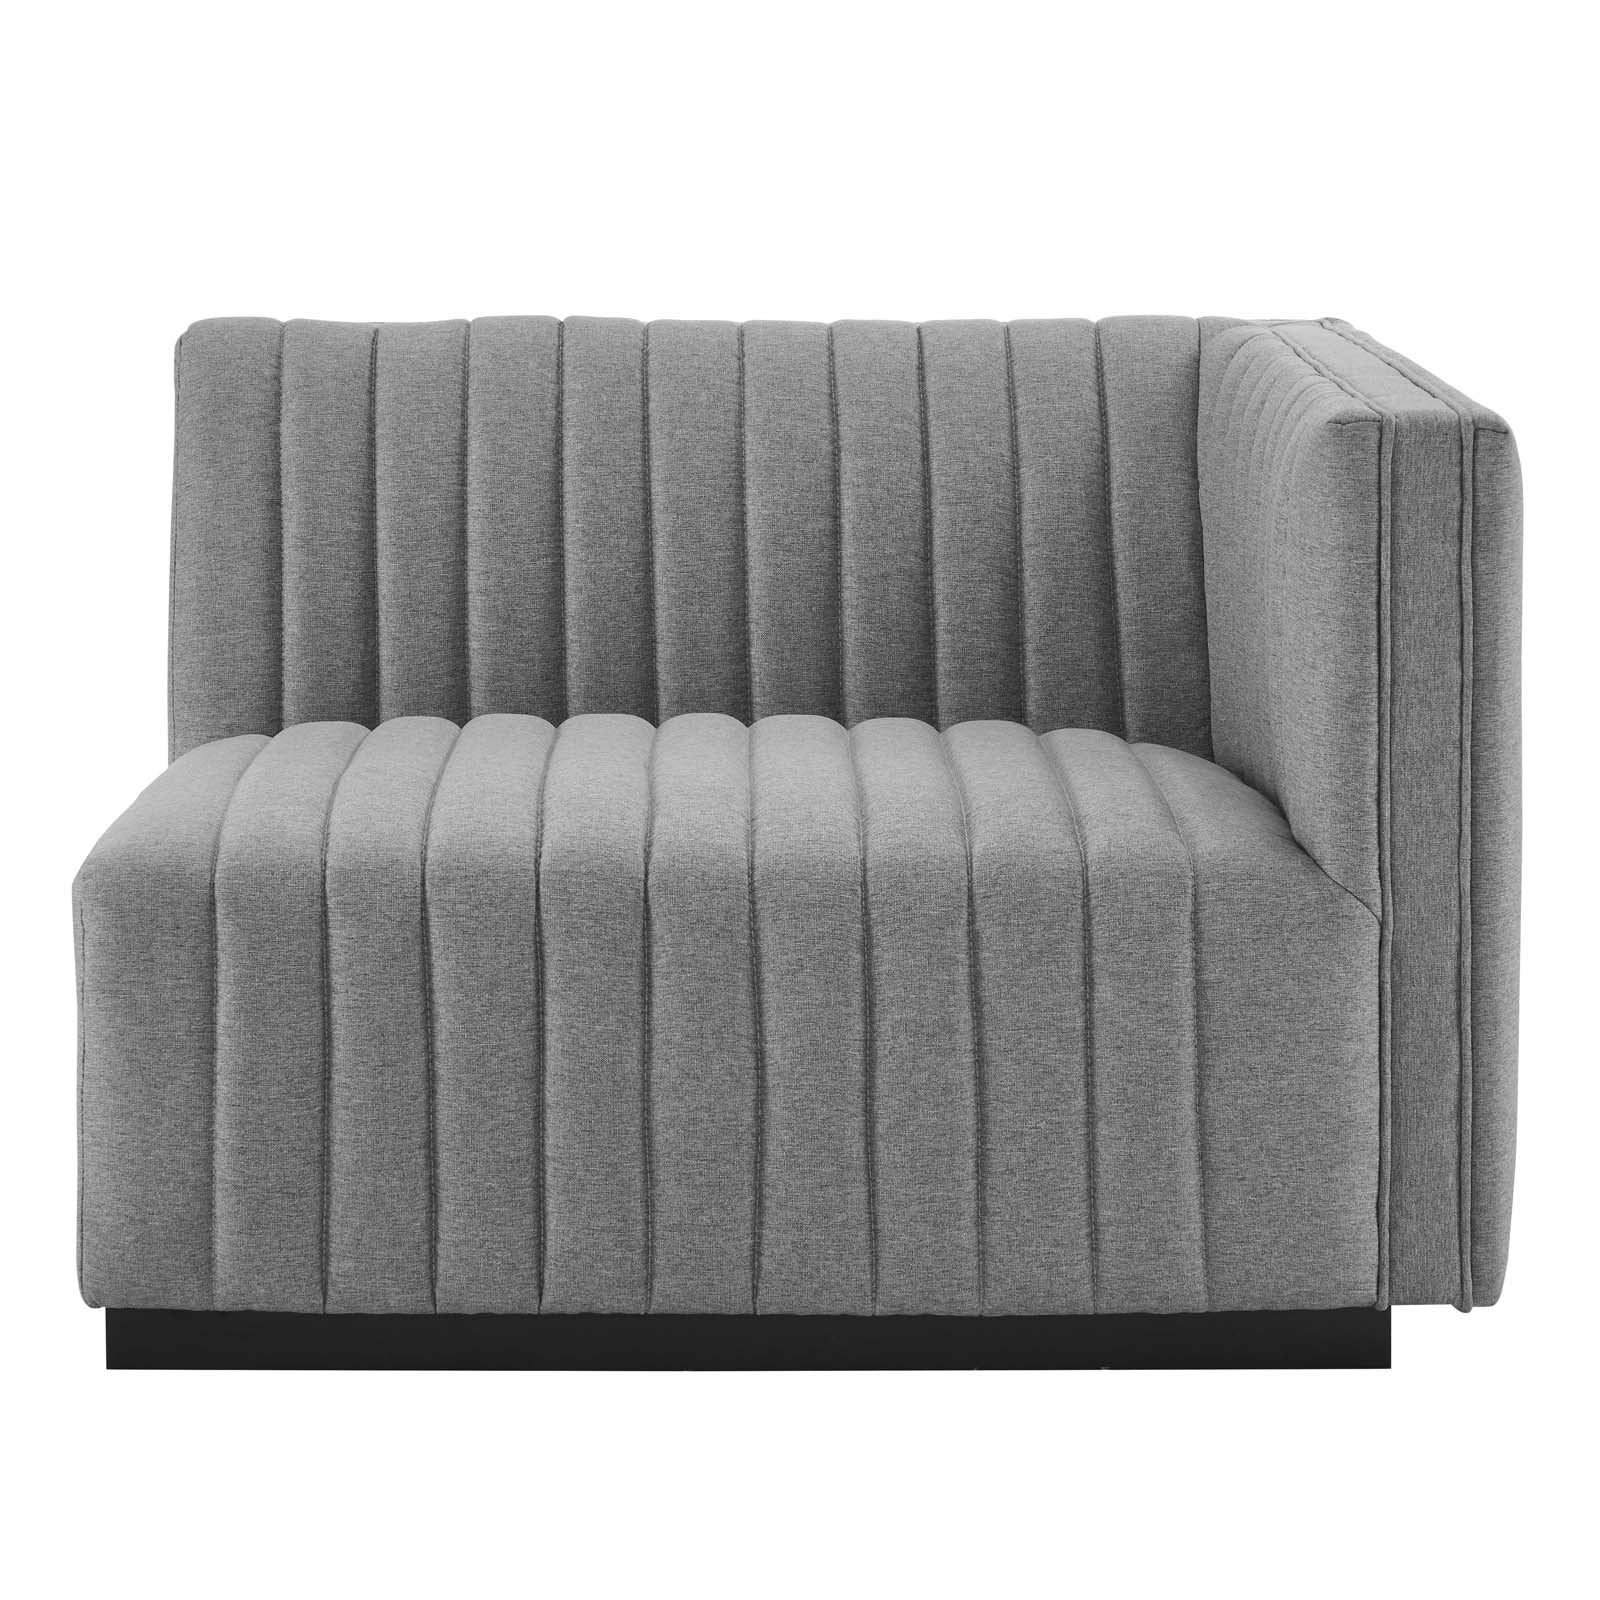 Modway Accent Chairs - Conjure Channel Tufted Upholstered Fabric Right-Arm Chair Black Light Gray